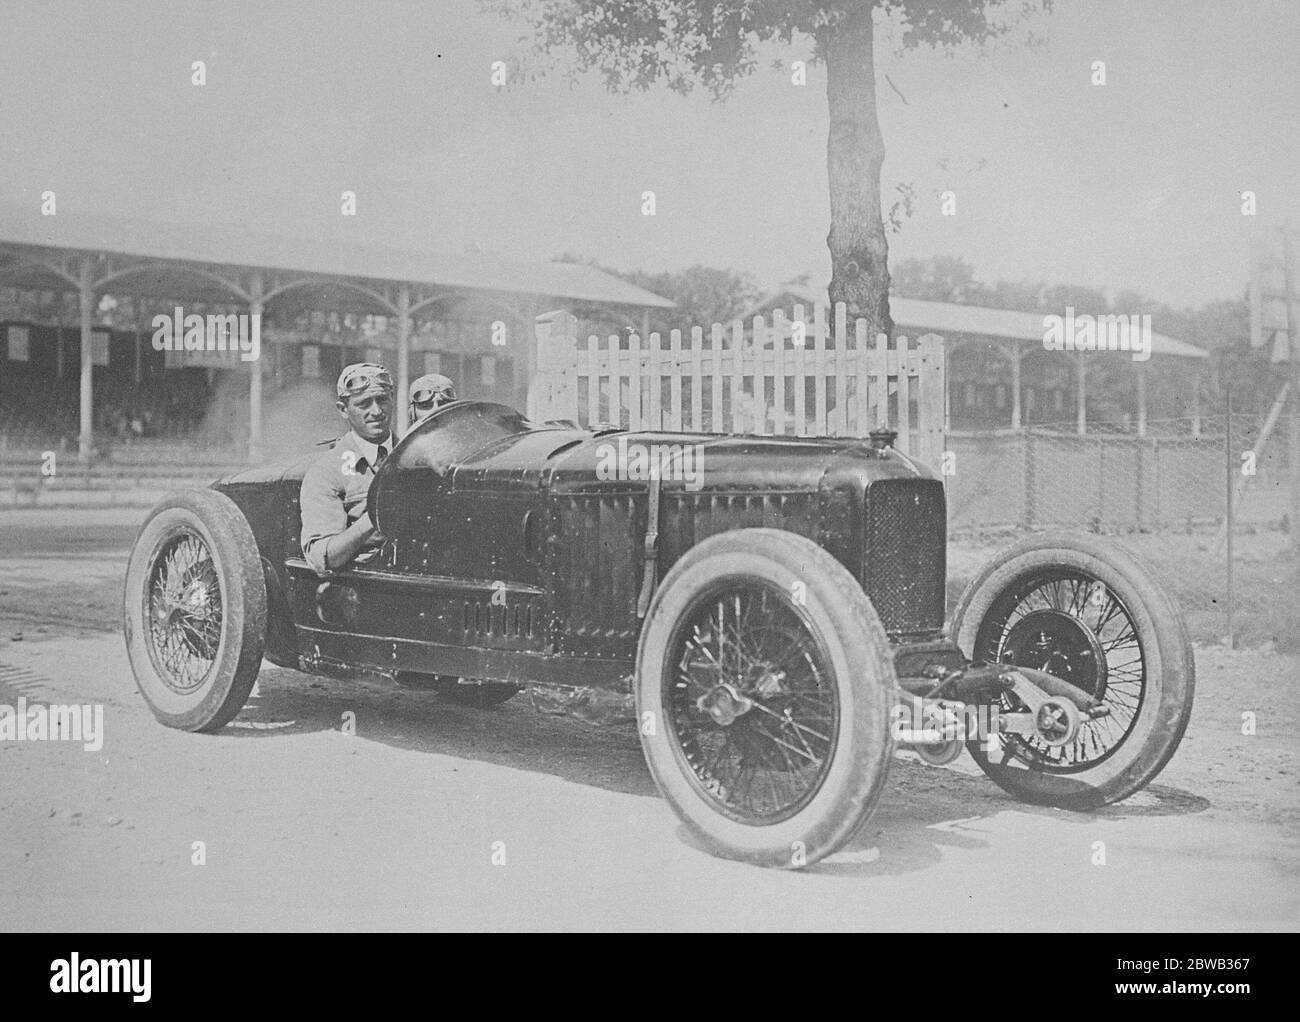 The Motor Car Grand Prix of Europ , Race started by Signor Mussolini Salamano won the motor car Grand Prix of Europe for Italy at Monza in a fiat car . The race was started by Signor Mussolini 13 September 1923 Stock Photo